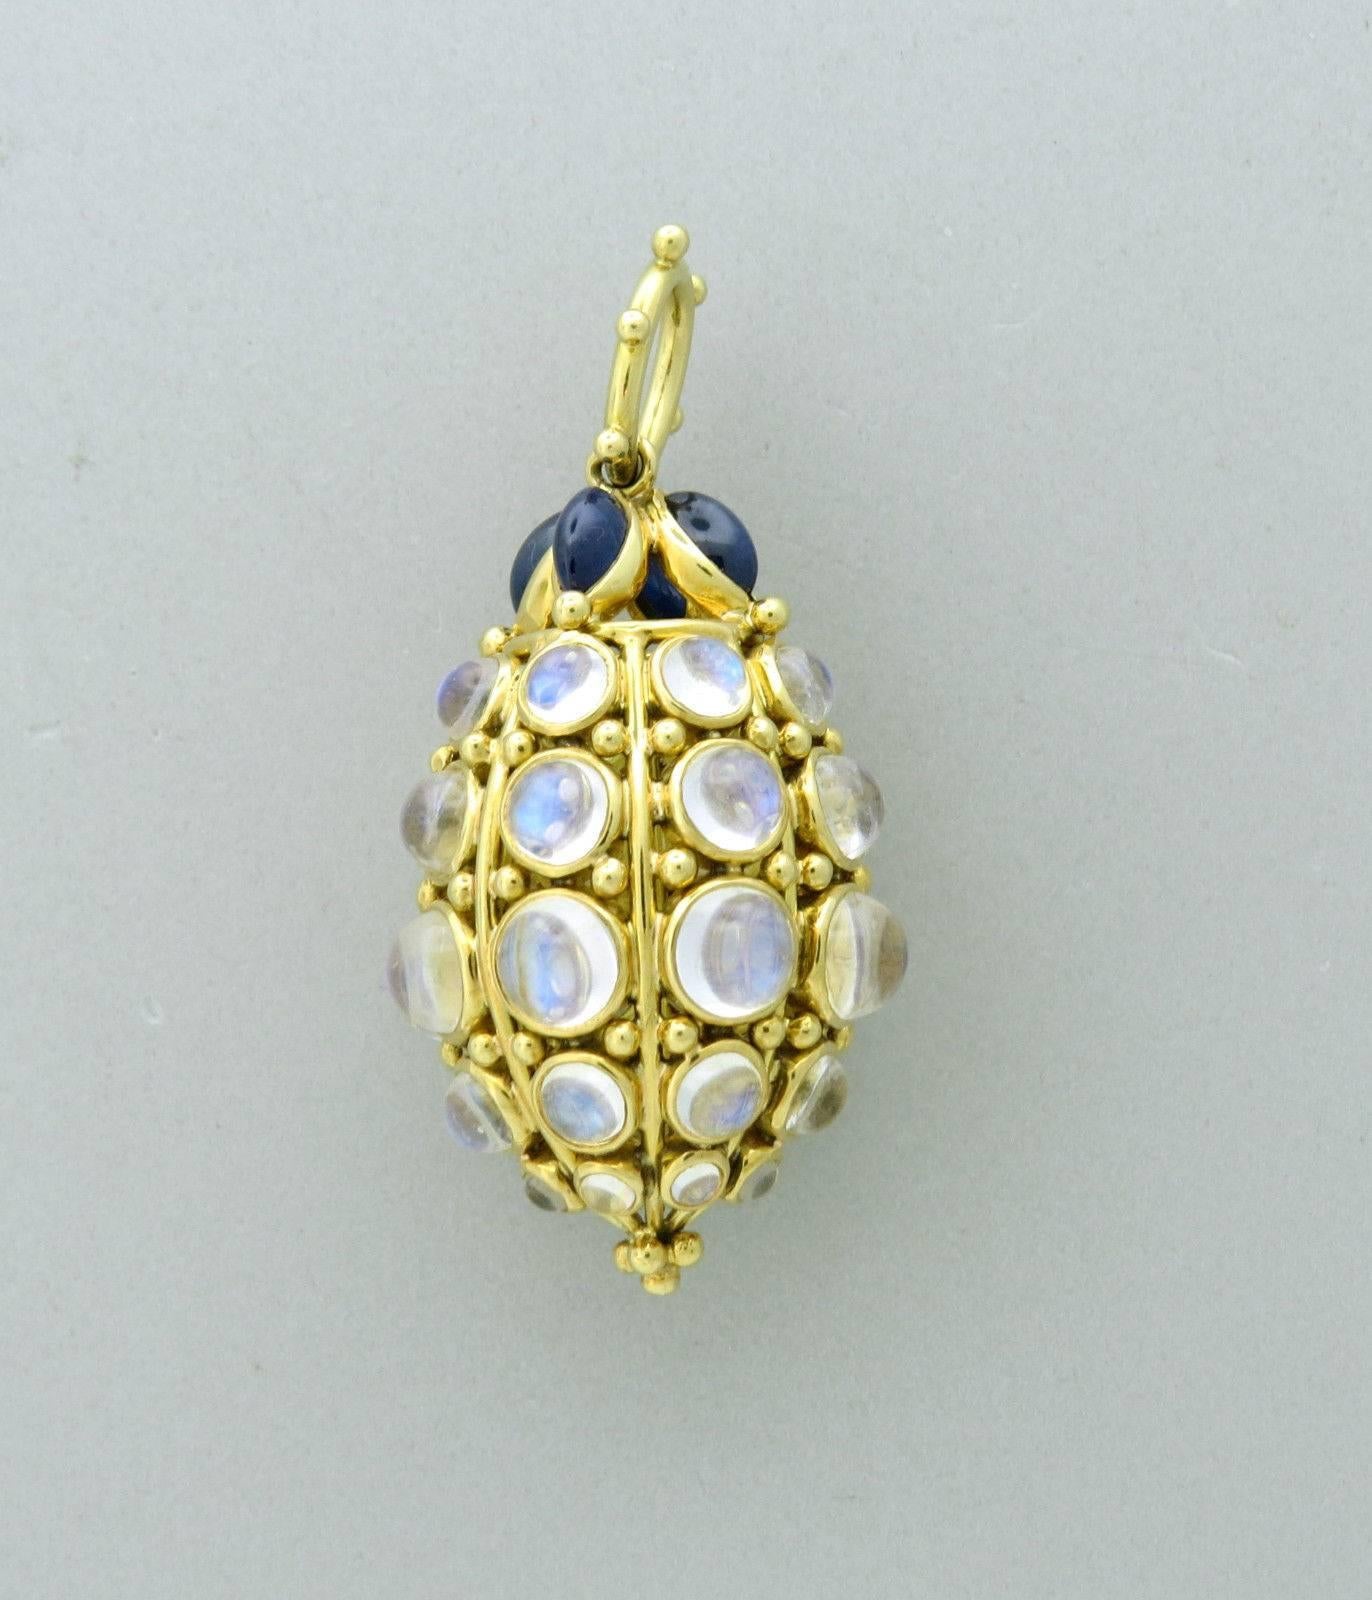 Large 18k gold pendant amulet , crafted by Temple St. Clair, featuring bee hive design. Pendant is  2 1/4" long x is 1 1/8" in diameter. Decorated with 26.72ctw in blue moonstones and 3.20ctw in sapphires. Marked with Temple mark and 750.